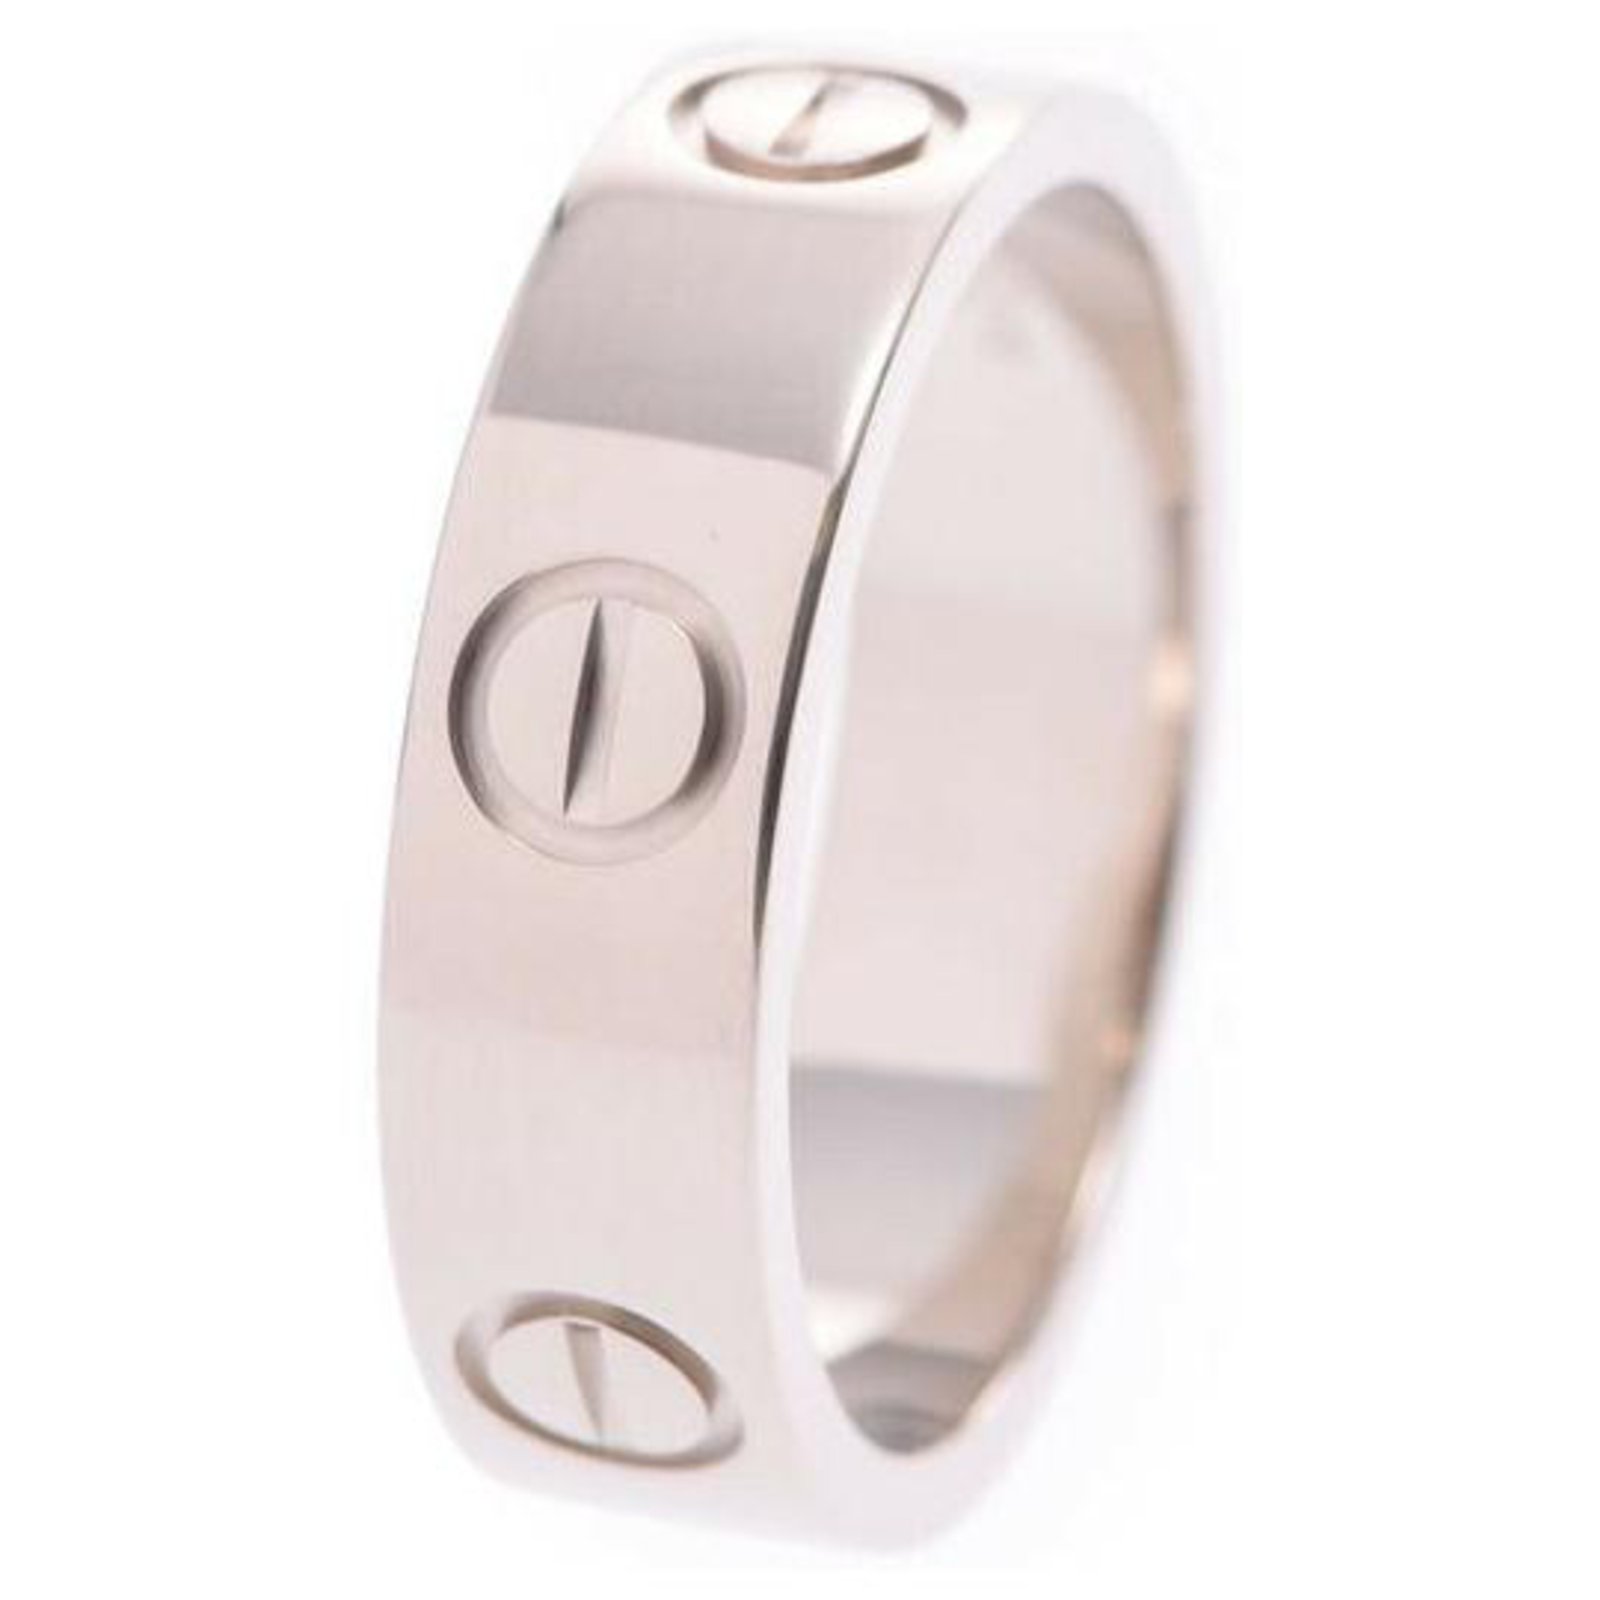 cartier love ring 750 53 price